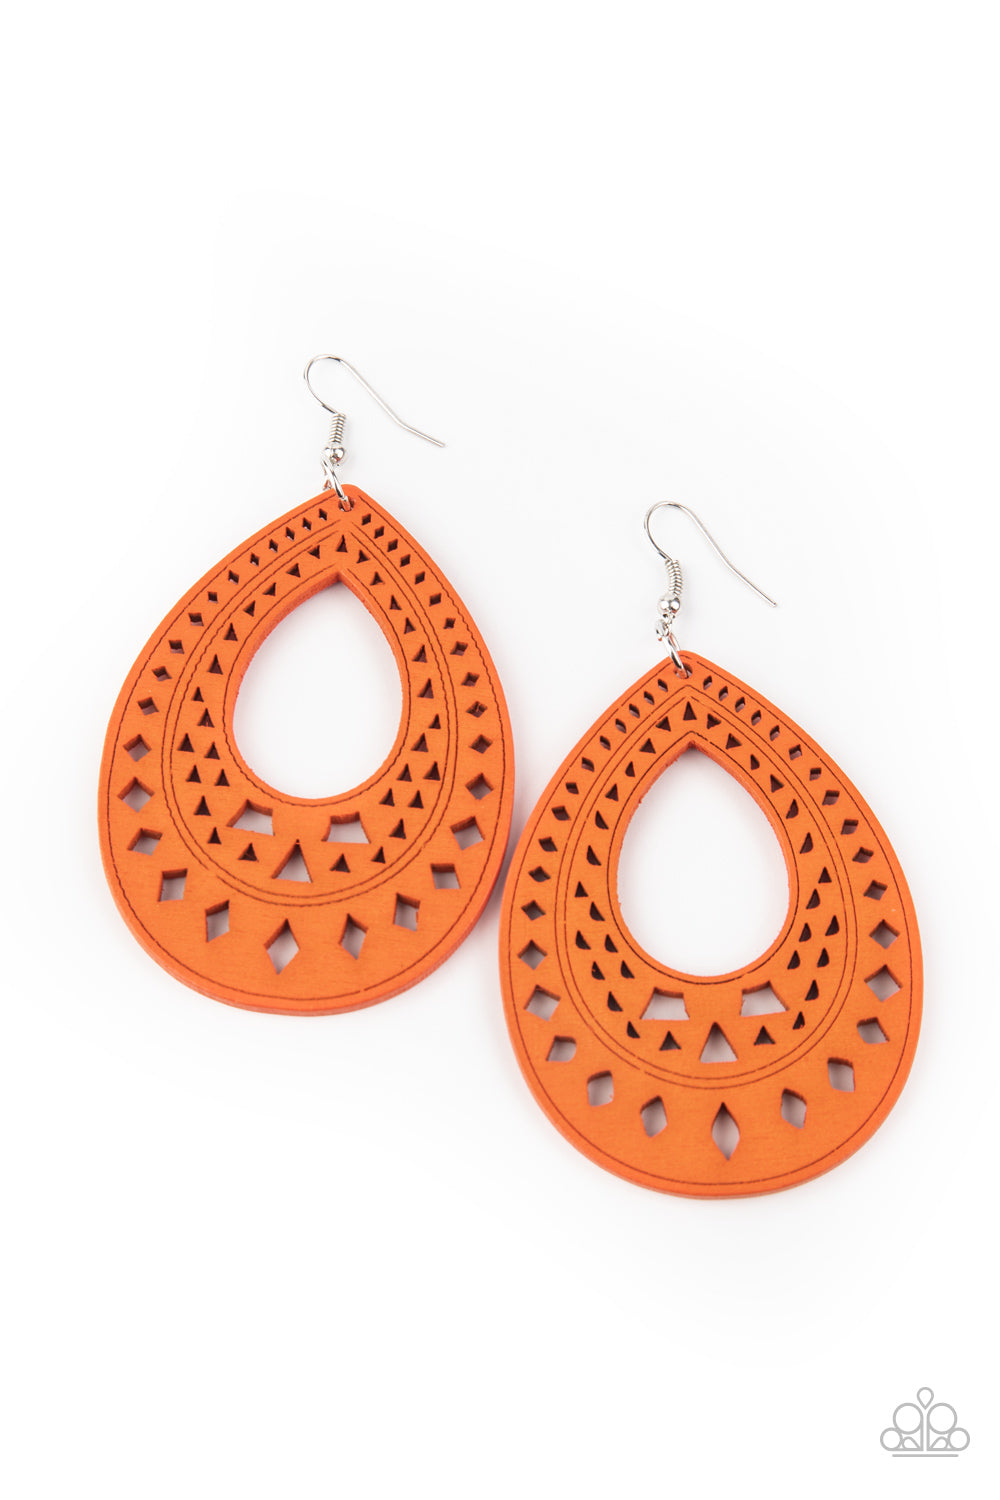 &lt;P&gt;Painted in a vivacious Amberglow finish, a wooden teardrop has been cut into a diamond and triangular stenciled pattern for a tribal inspired flair. Earring attaches to a standard fishhook fitting.&lt;/P&gt;  

&lt;P&gt; &lt;I&gt;  Sold as one pair of earrings. &lt;/I&gt;  &lt;/P&gt;


&lt;img src=\&quot;https://d9b54x484lq62.cloudfront.net/paparazzi/shopping/images/517_tag150x115_1.png\&quot; alt=\&quot;New Kit\&quot; align=\&quot;middle\&quot; height=\&quot;50\&quot; width=\&quot;50\&quot;/&gt;